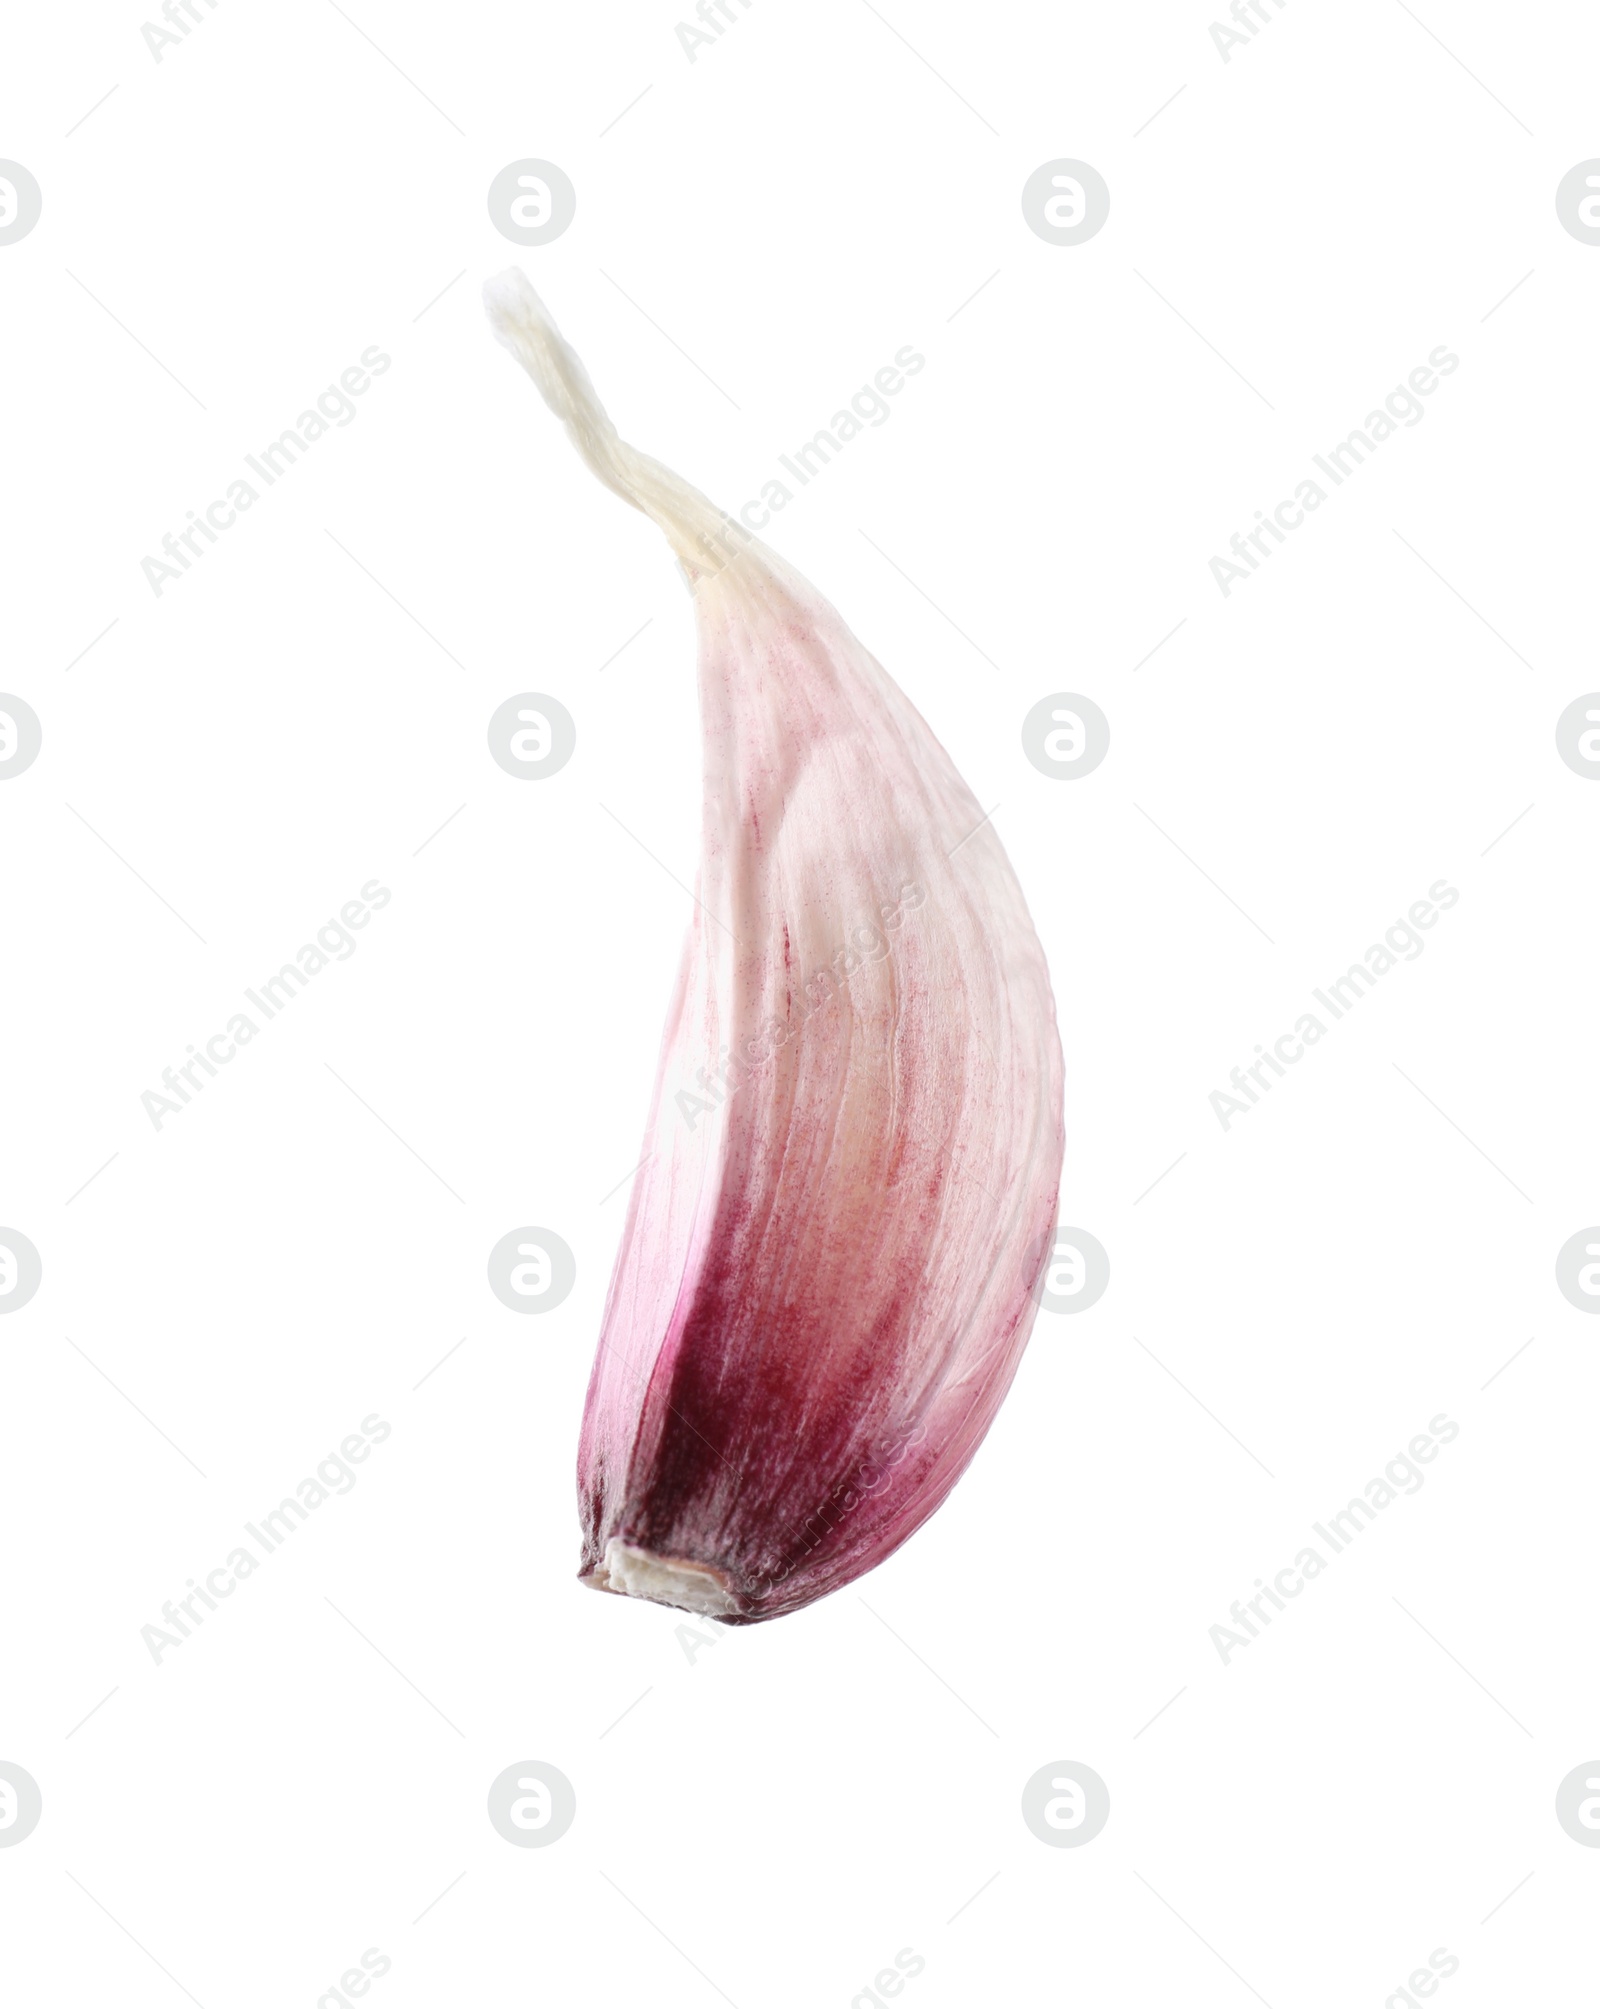 Photo of One unpeeled garlic clove isolated on white